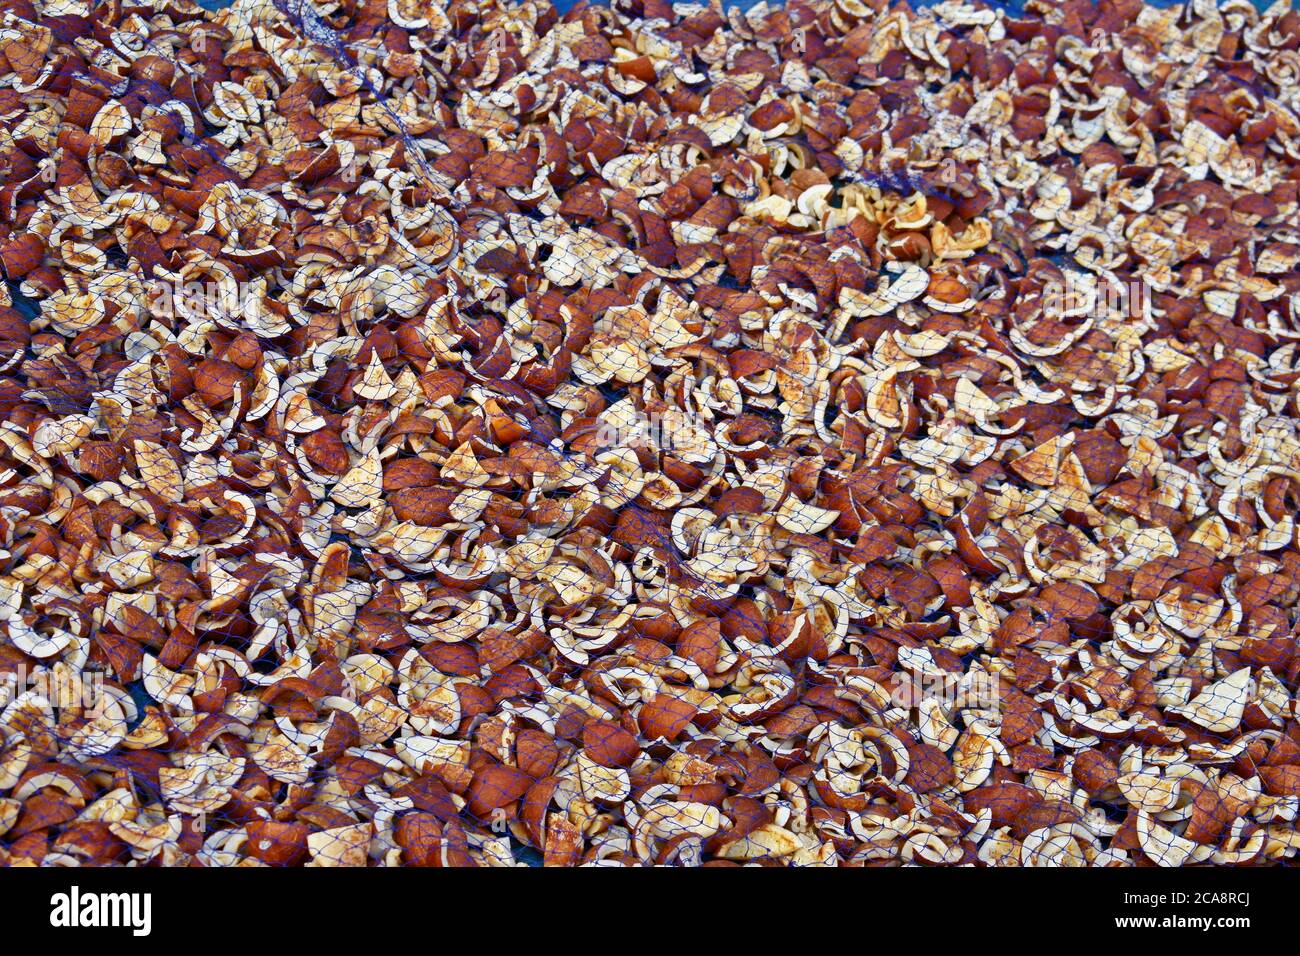 A whole lot a pieces of coconuts placed on a surface to naturally dried up by sun. Method used to make coconut oil. Stock Photo